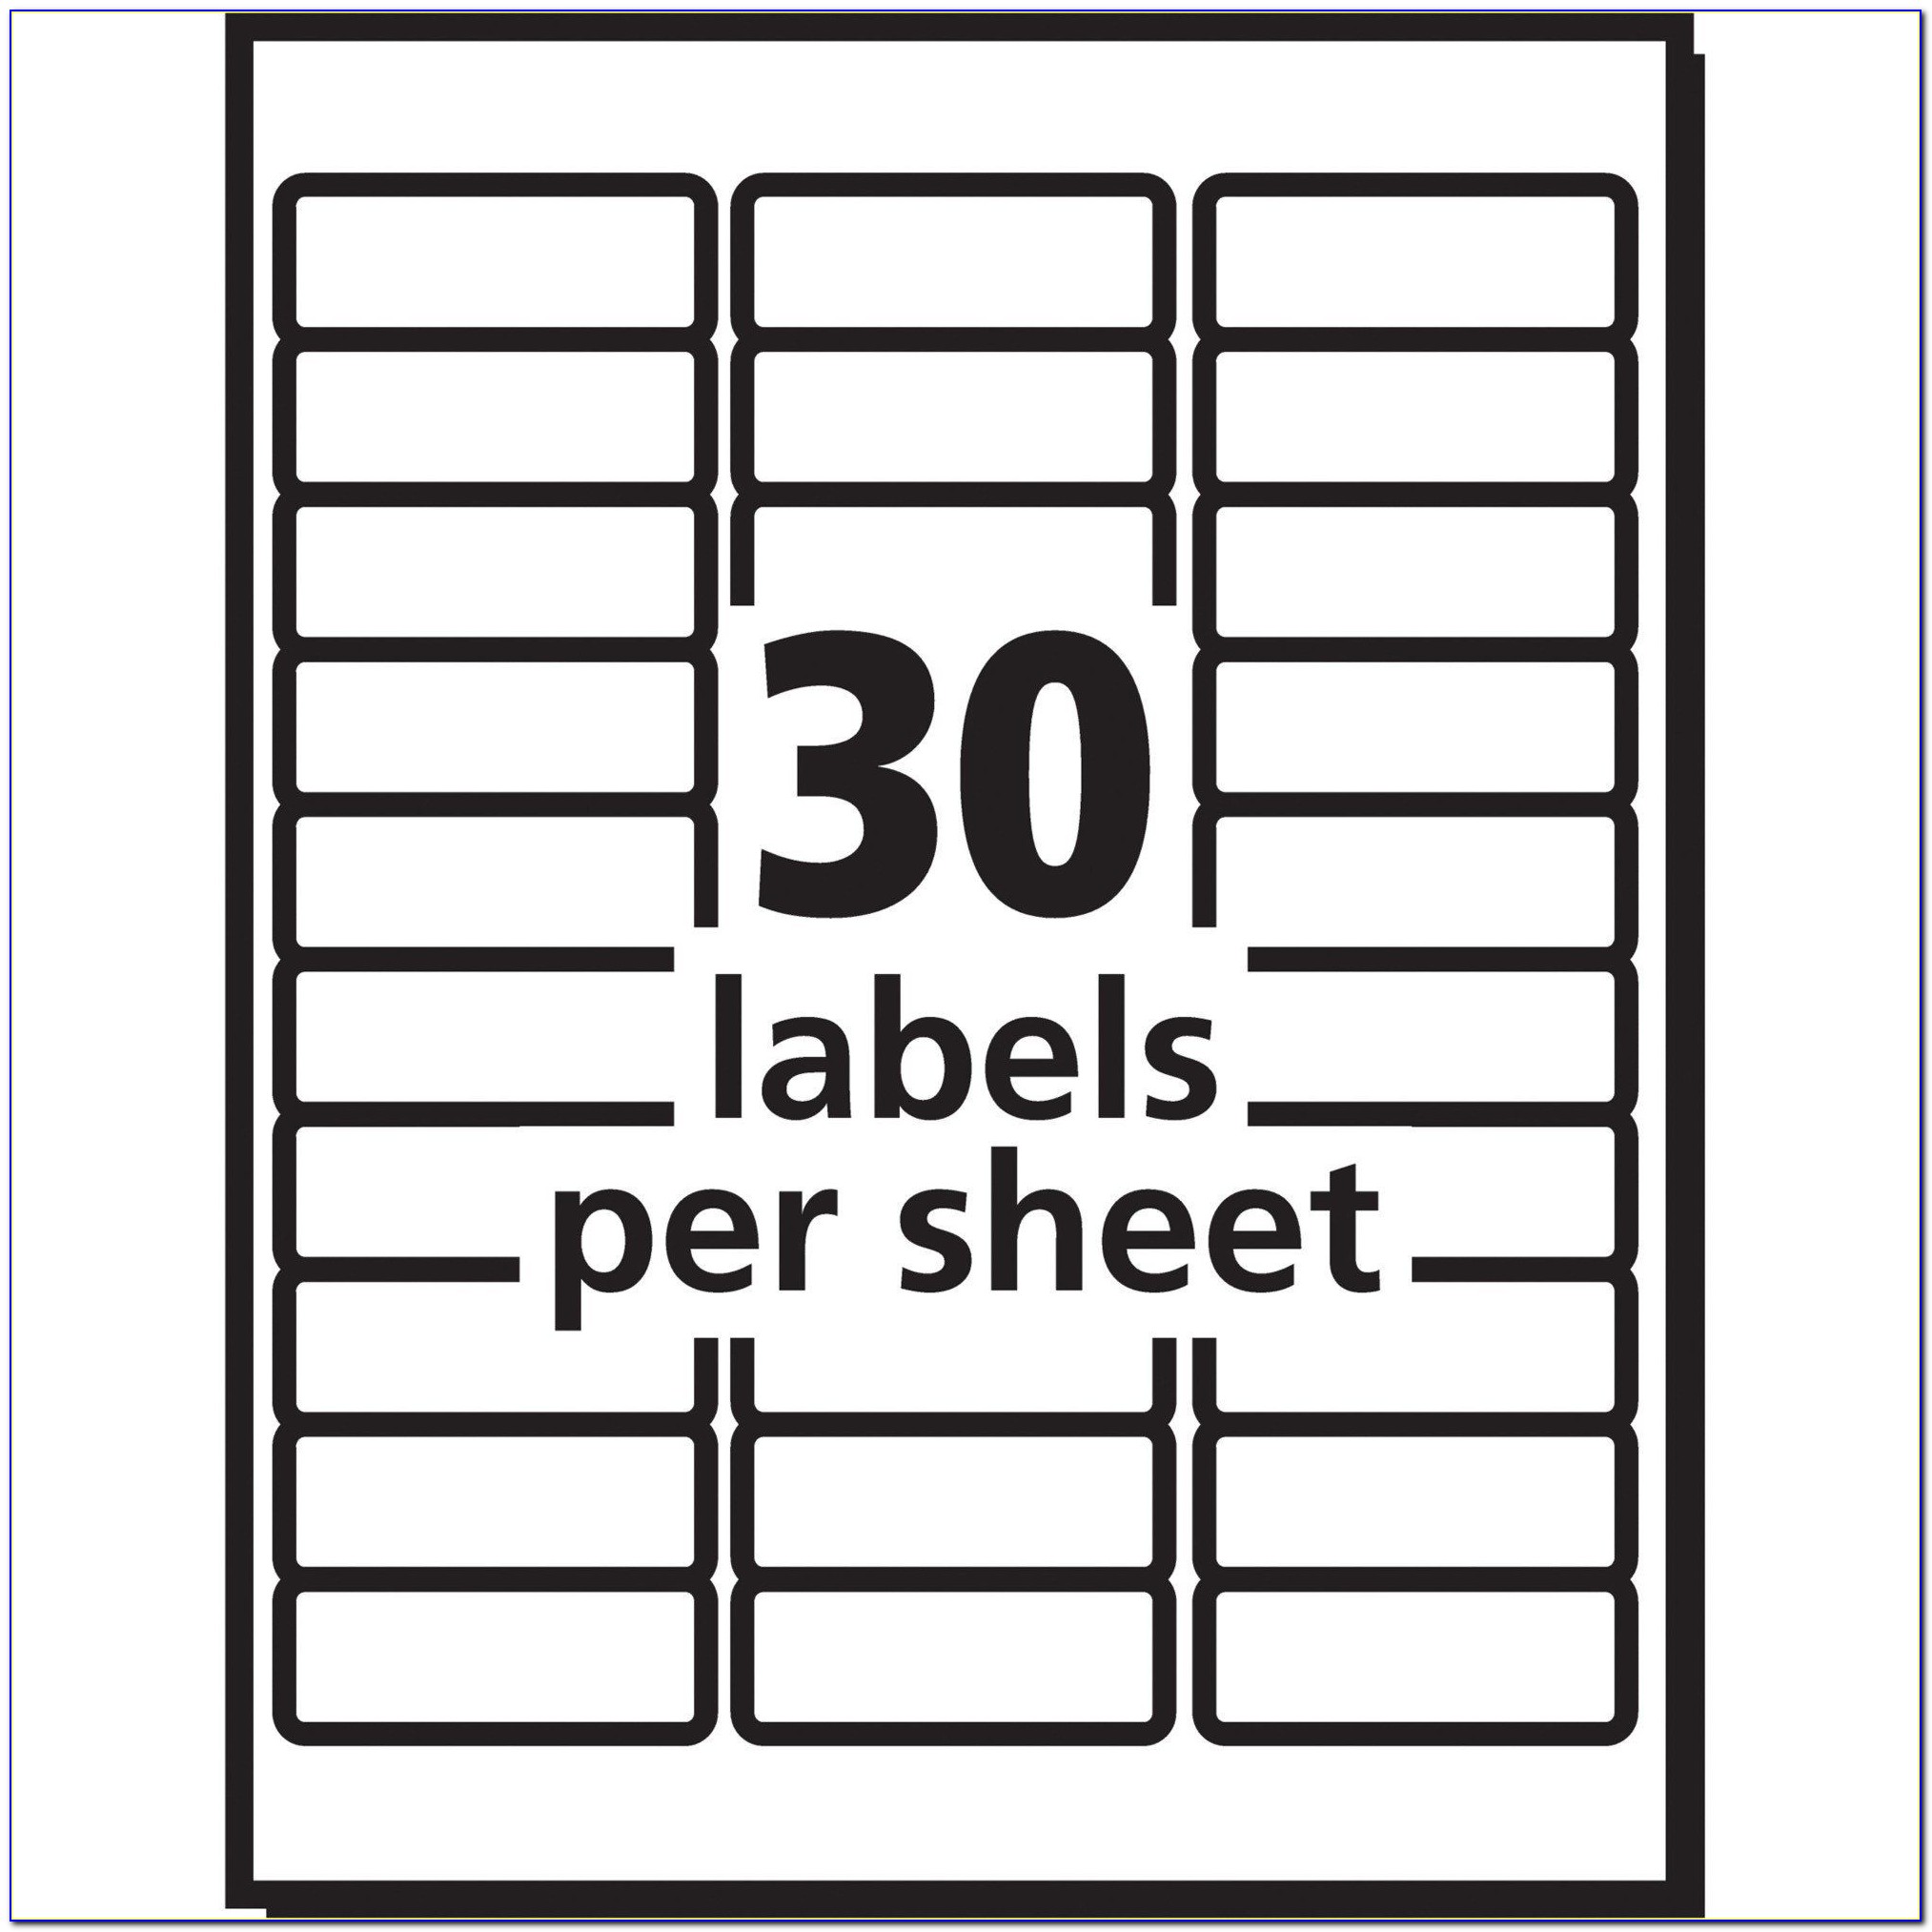 Avery Label 5163 Template